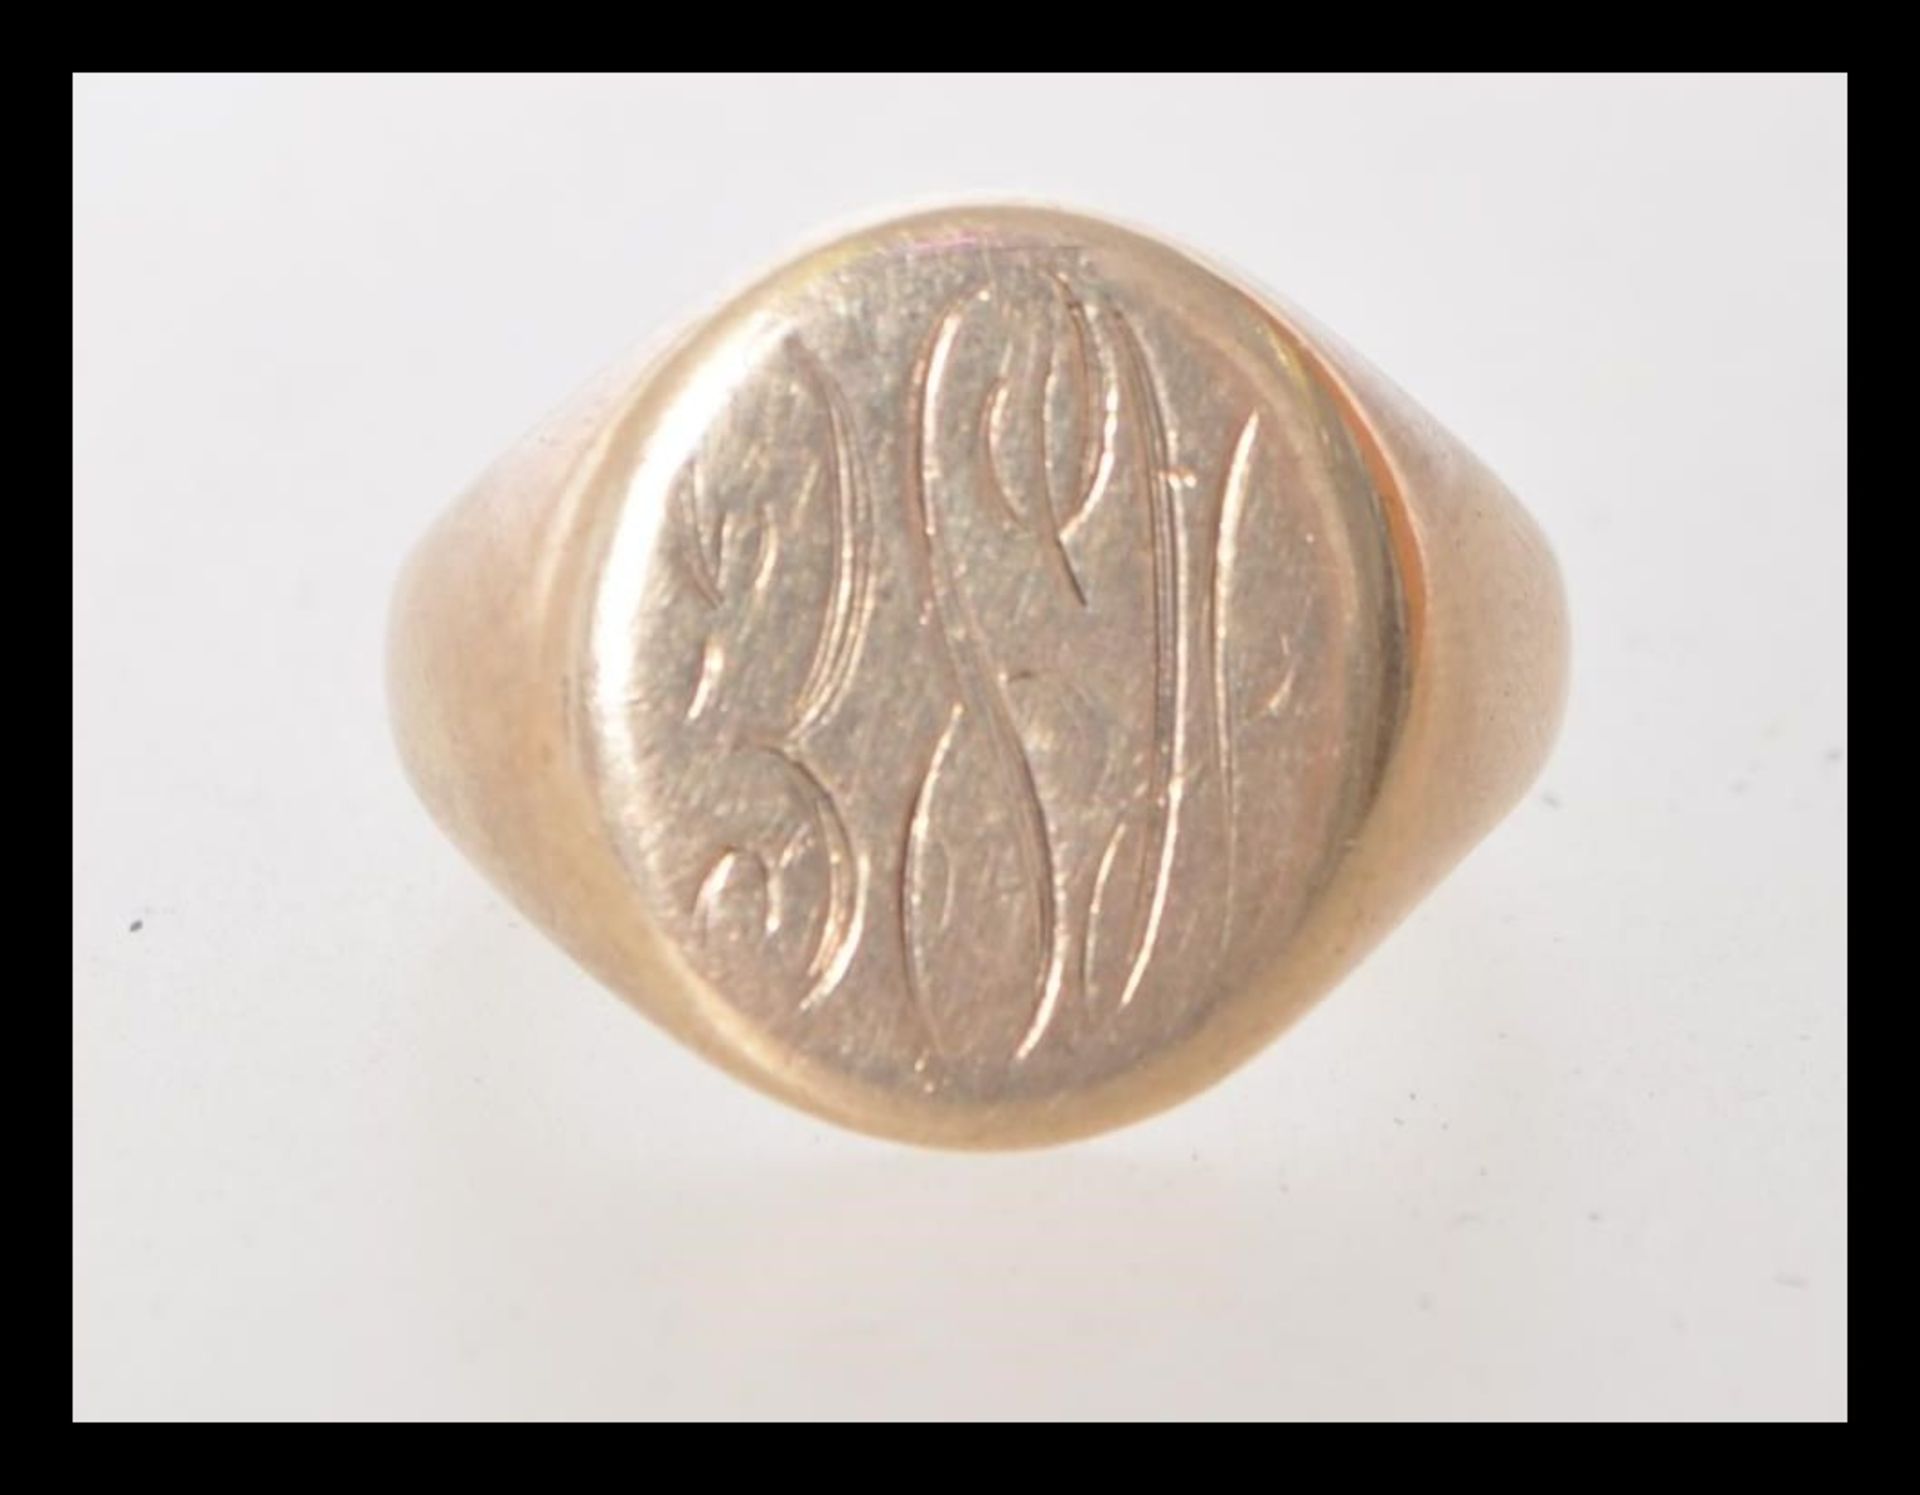 A hallmarked 9ct gold signet ring with a circular cartouche engraved with initials. Hallmarked